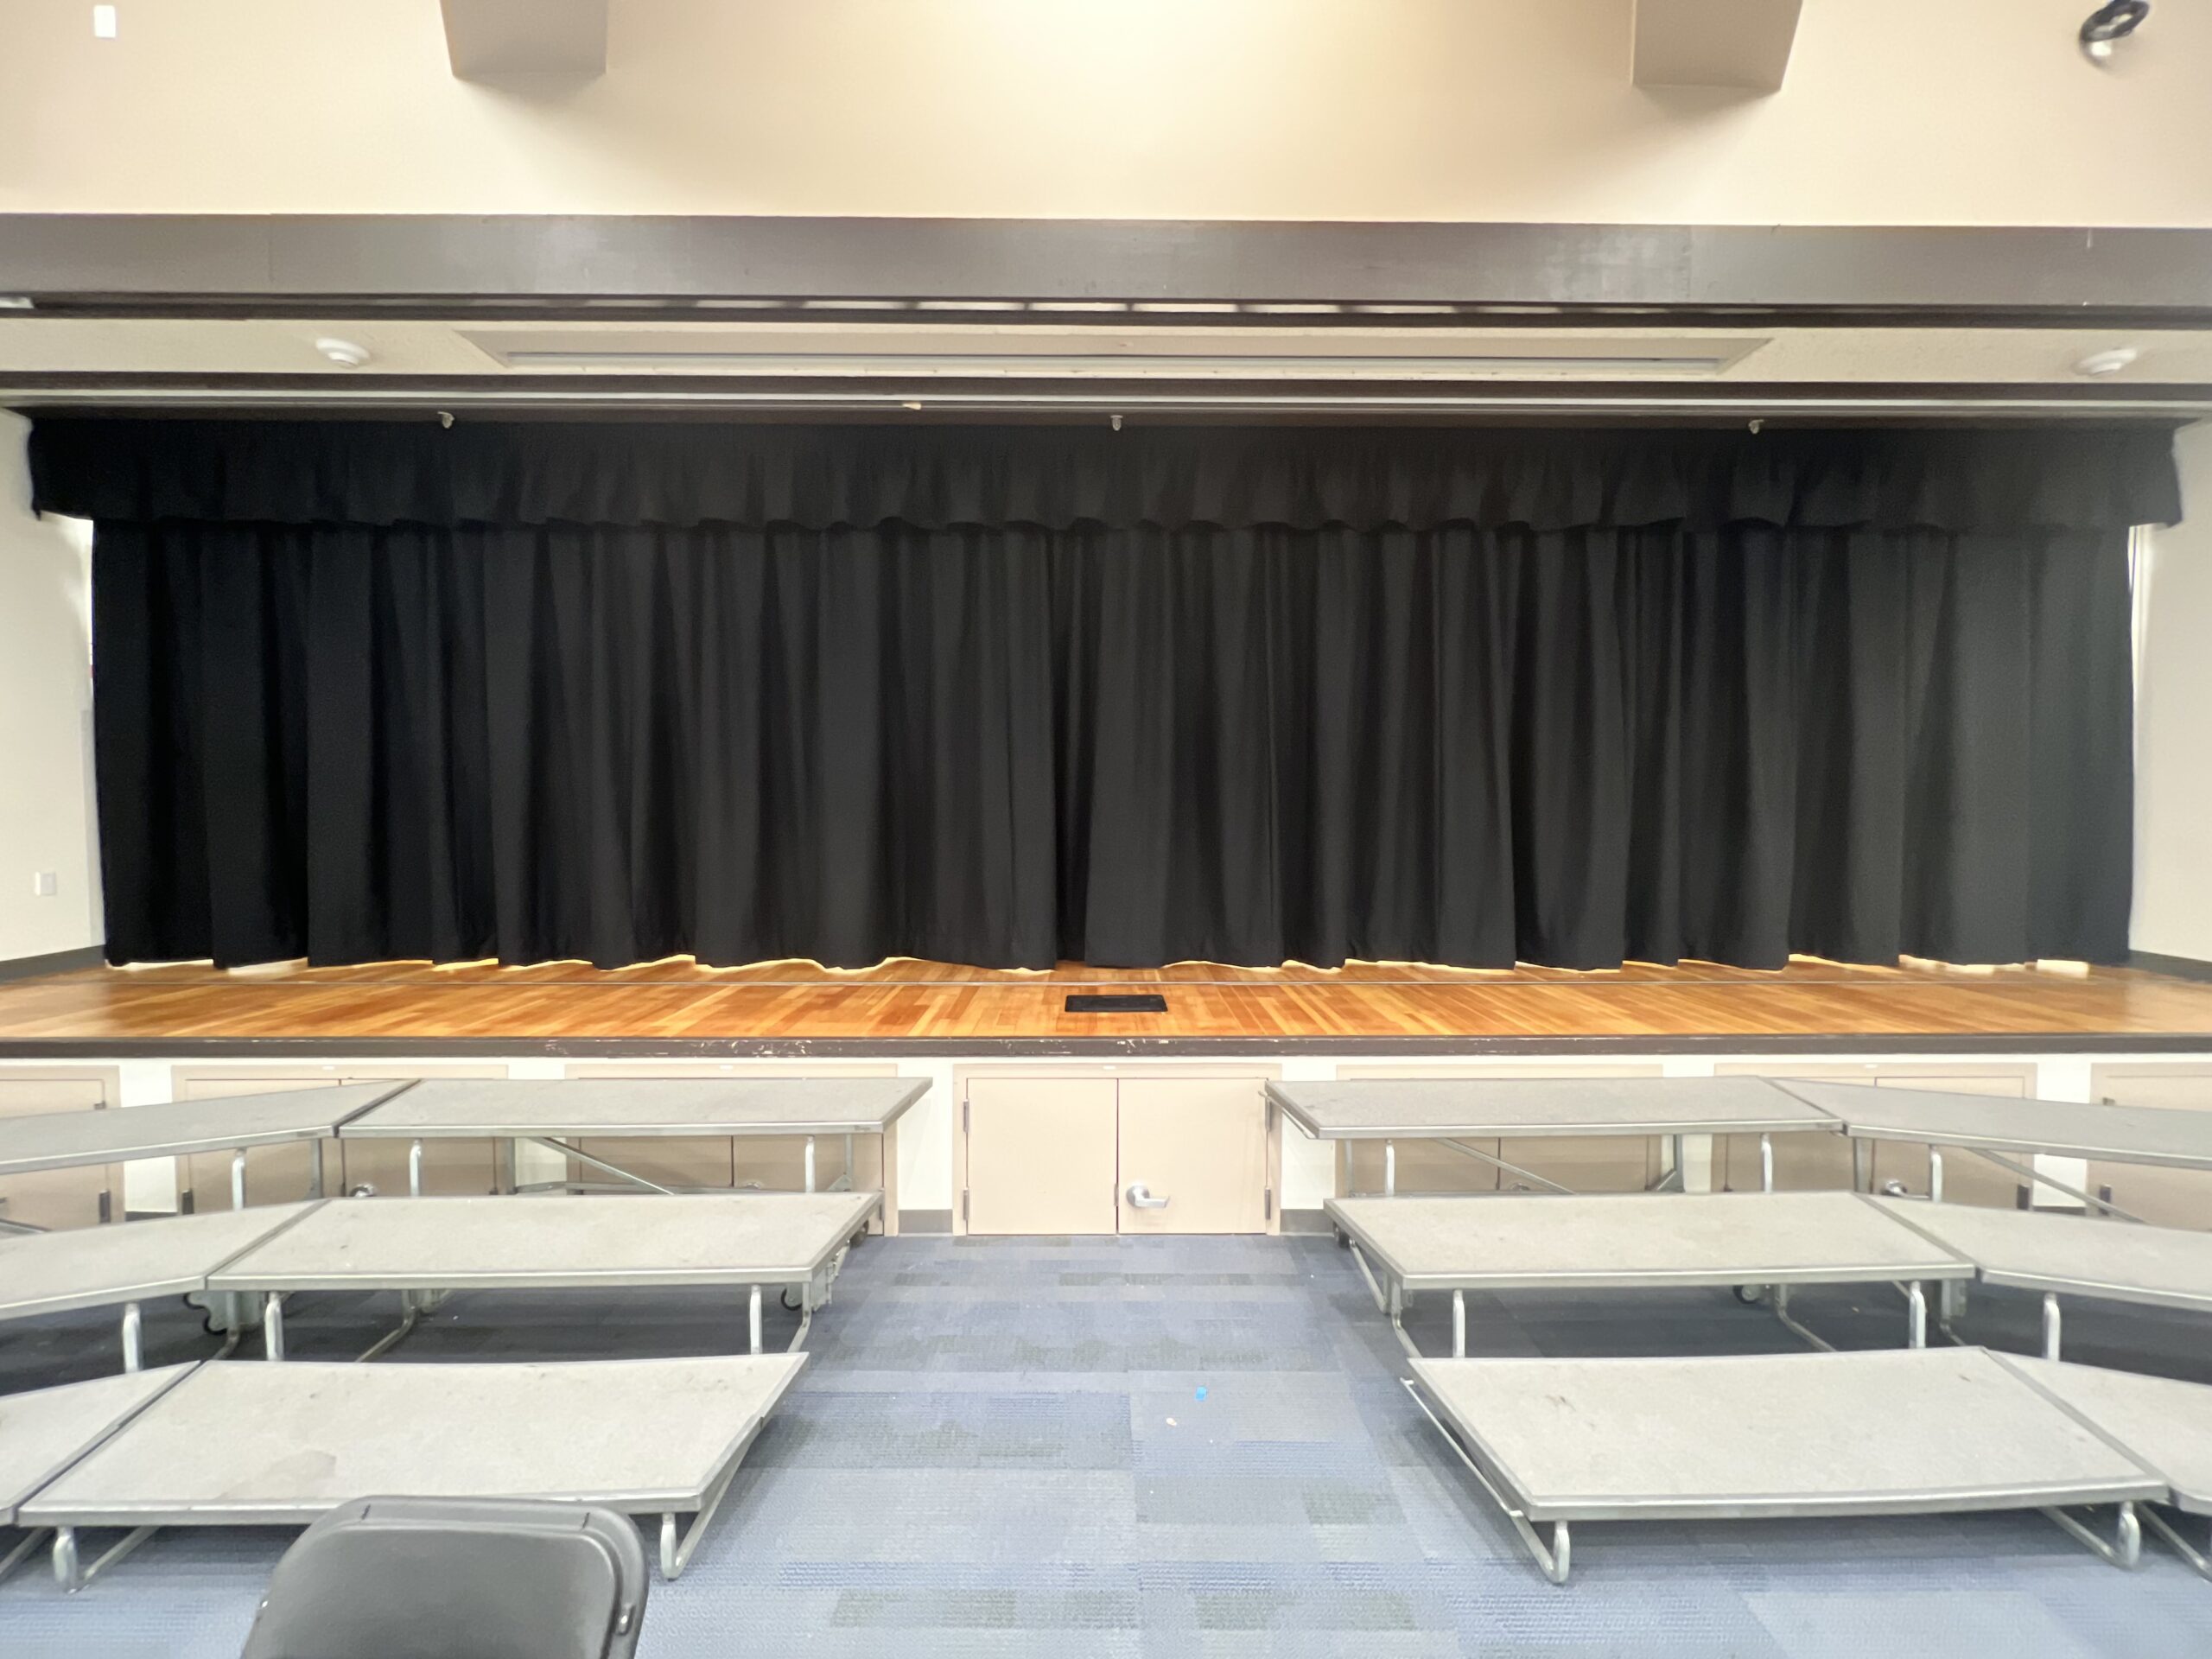 A stage with wooden flooring